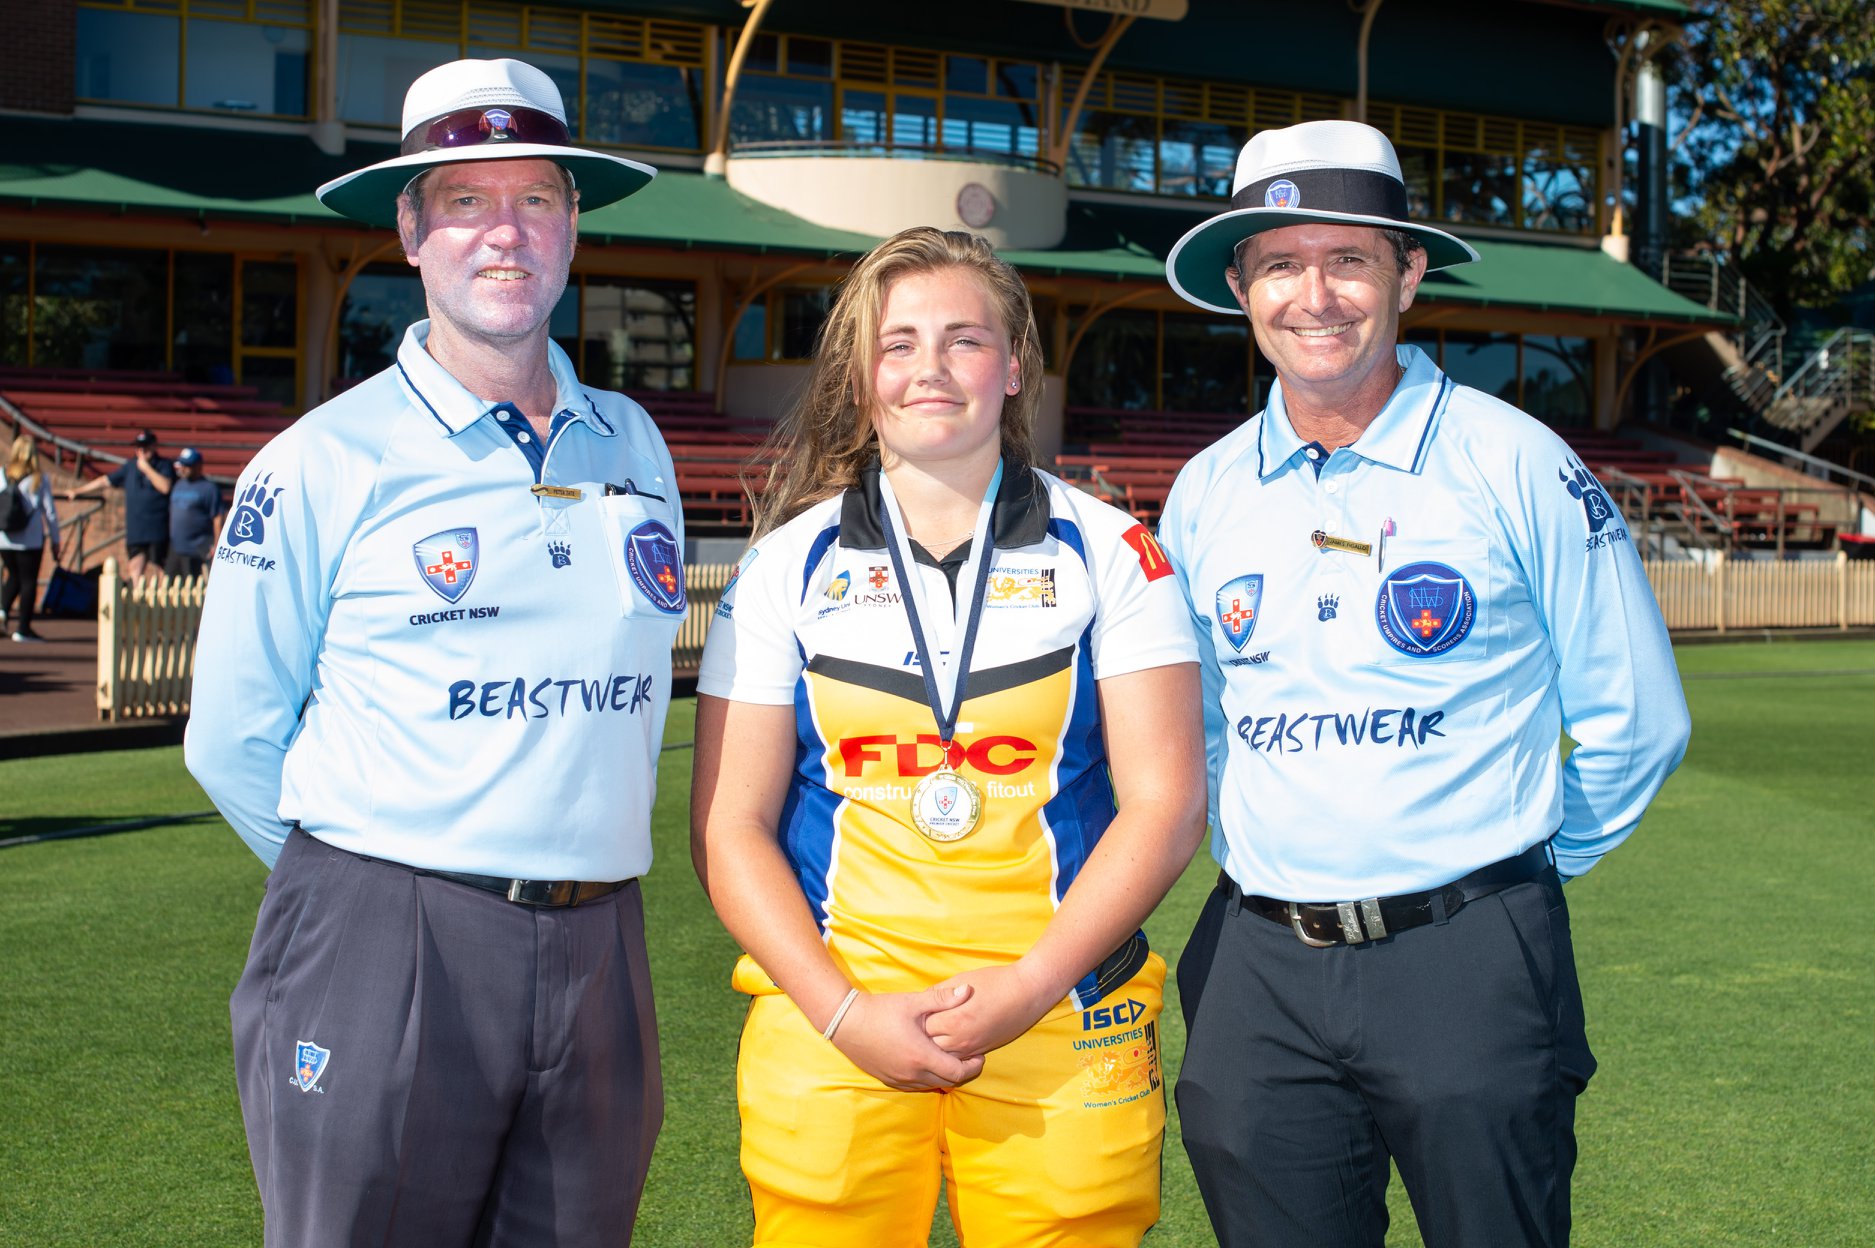 Bess Heath was the Player of the Match, batting Universities to victory with 65 runs from 36 balls.